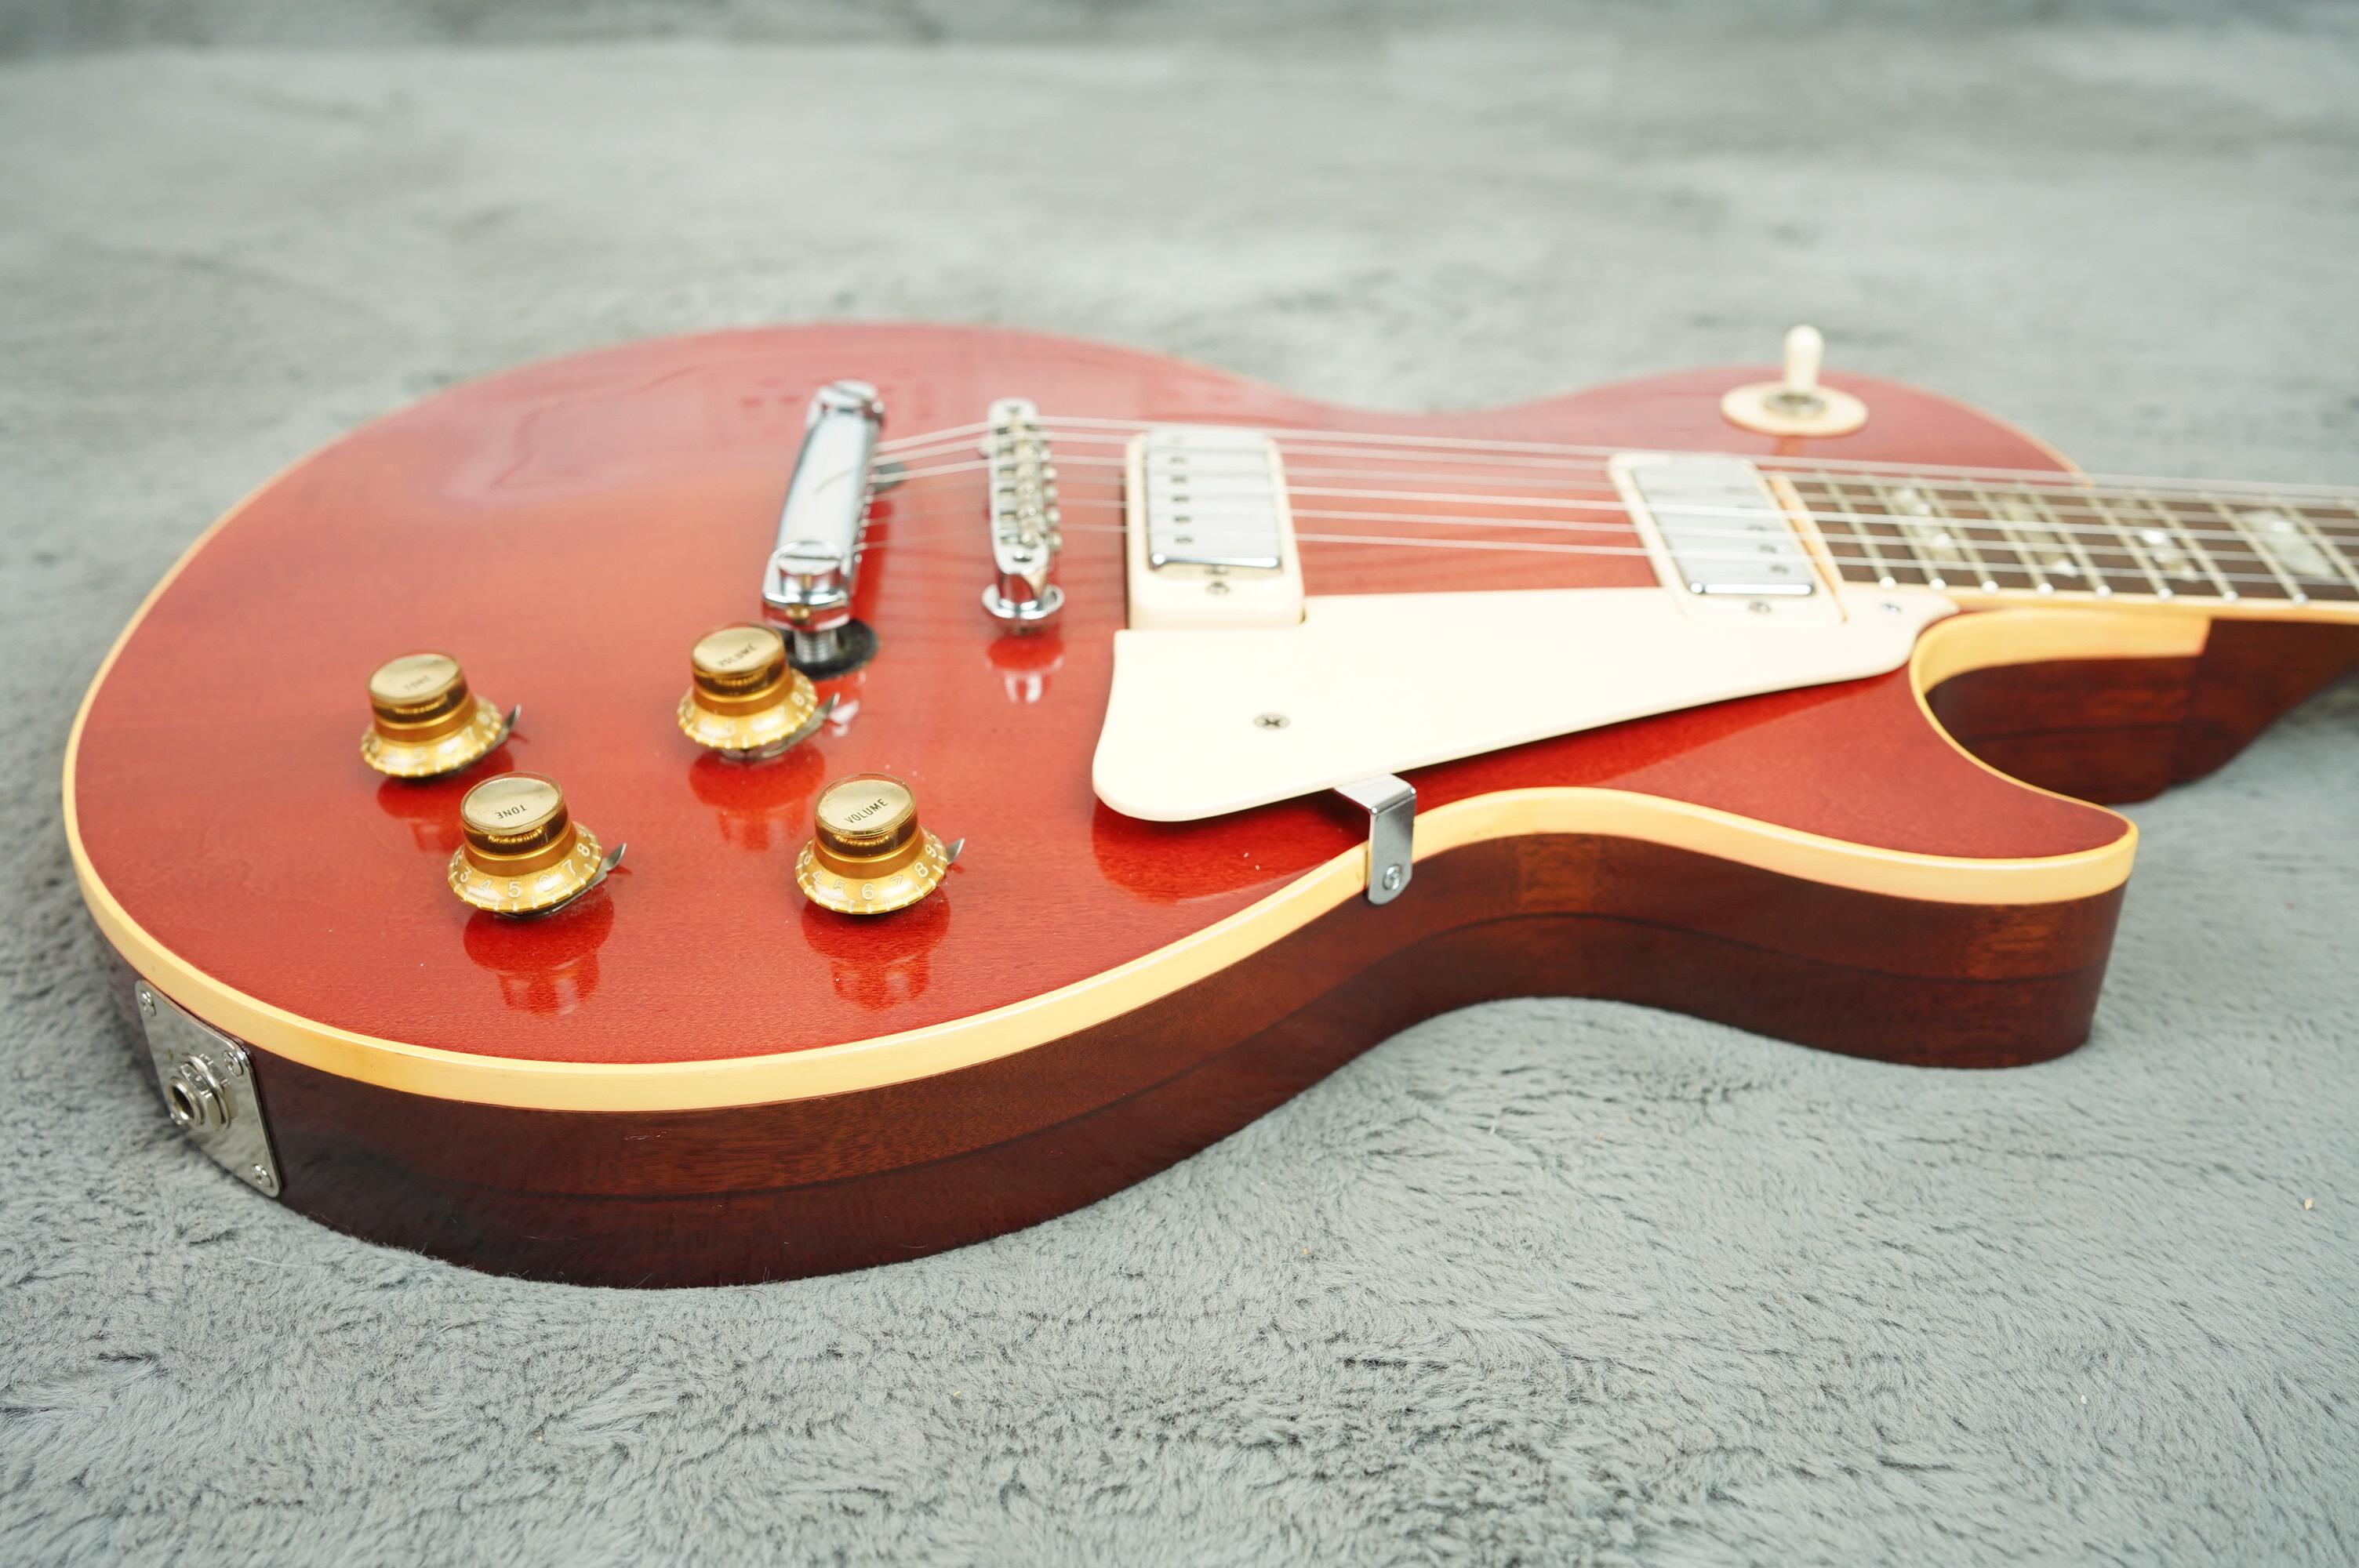 1972 Gibson Les Paul Deluxe Cherry Red